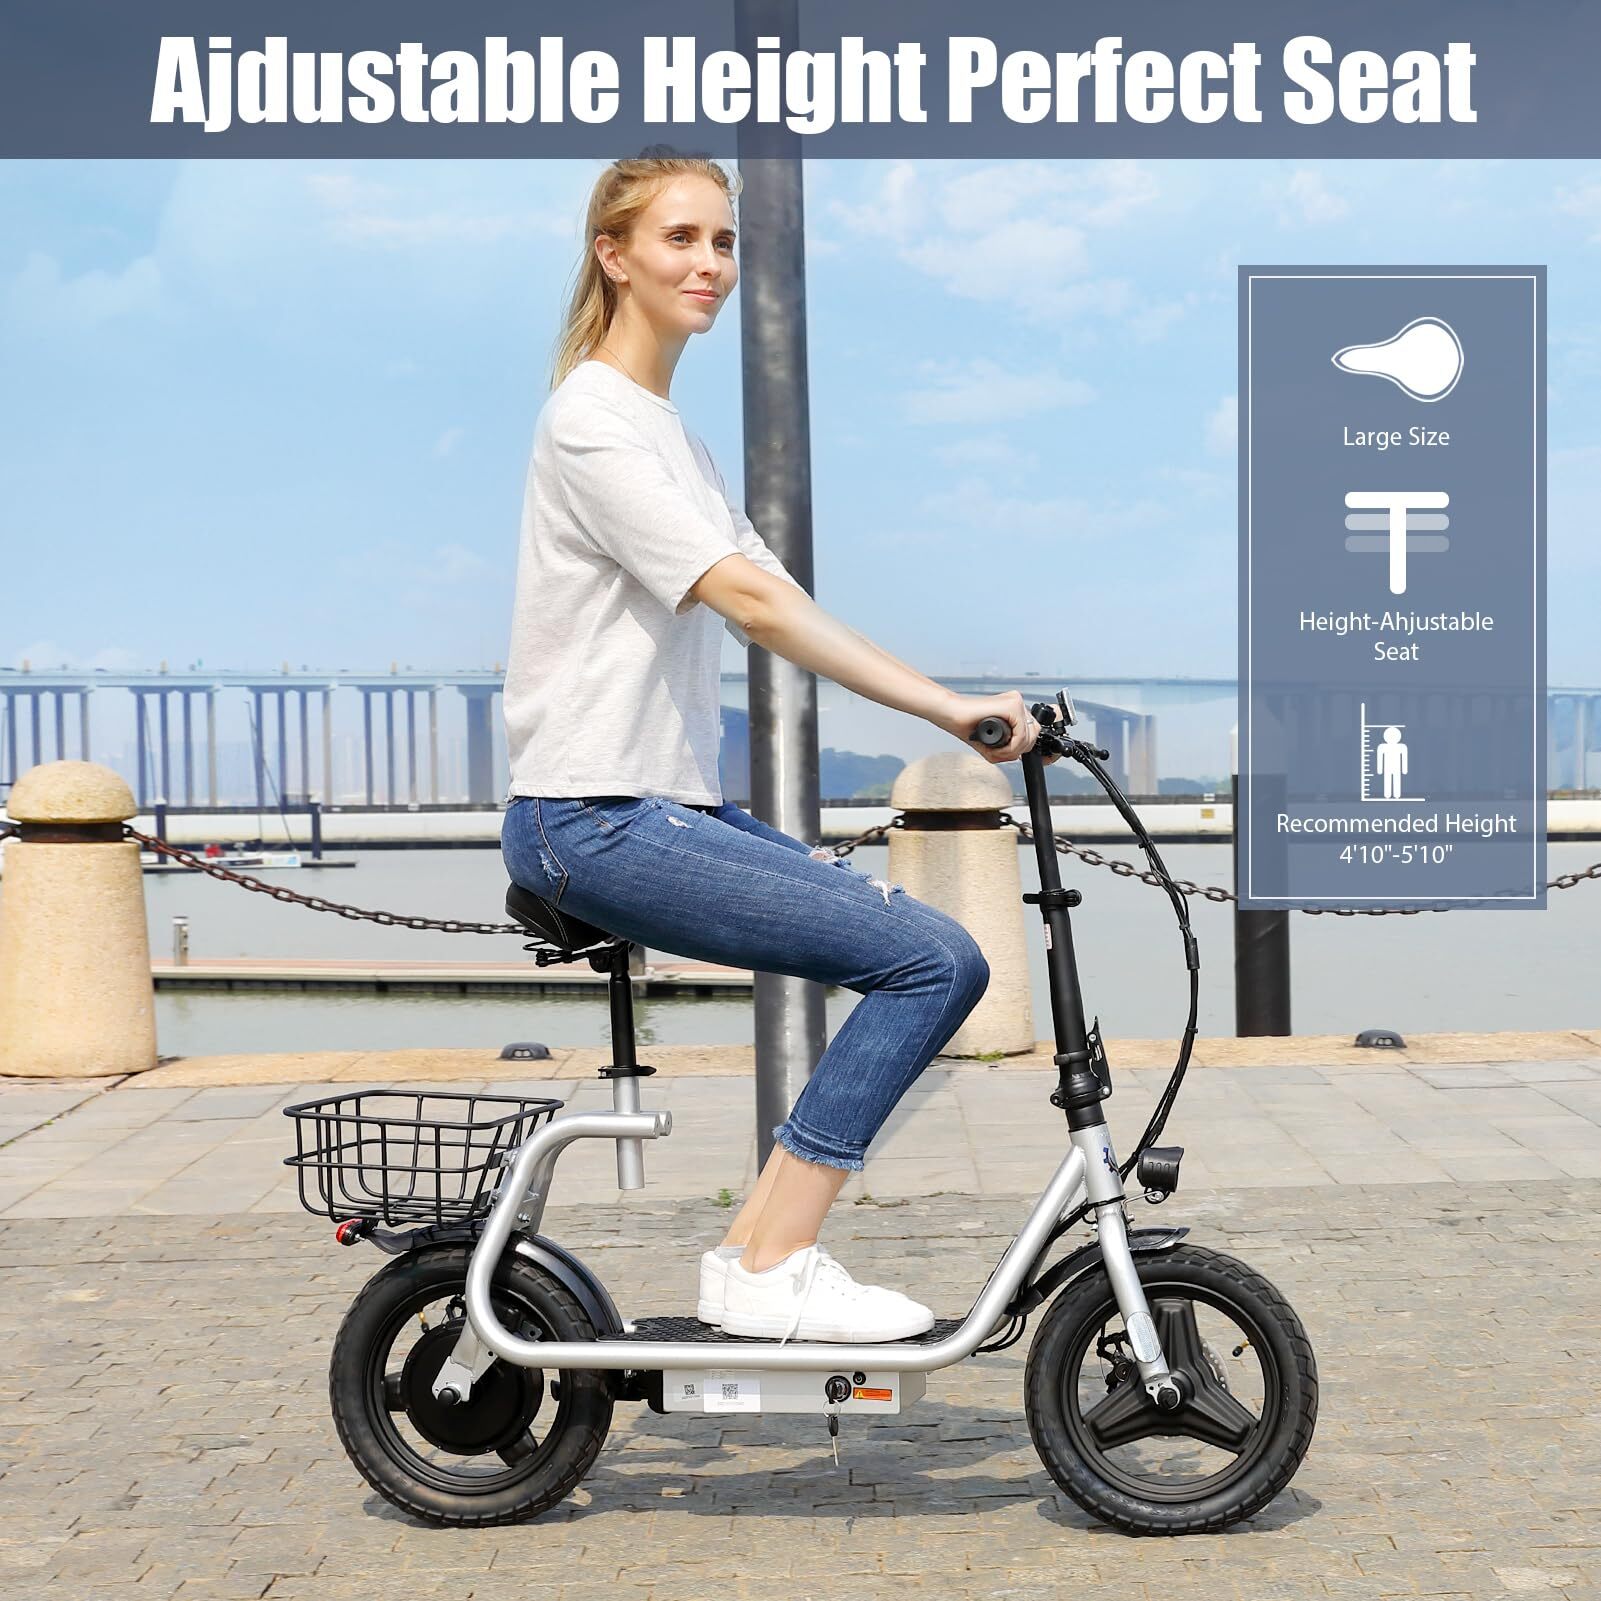 Caroma 800W(Peak) Adults Electric Scooter with Removable Seat, Max Speed 20mph Up to 25 Miles Range, 14" Tire for Commuting Scooter with Basket, Folding Electric Scooter, Silver - image 5 of 9